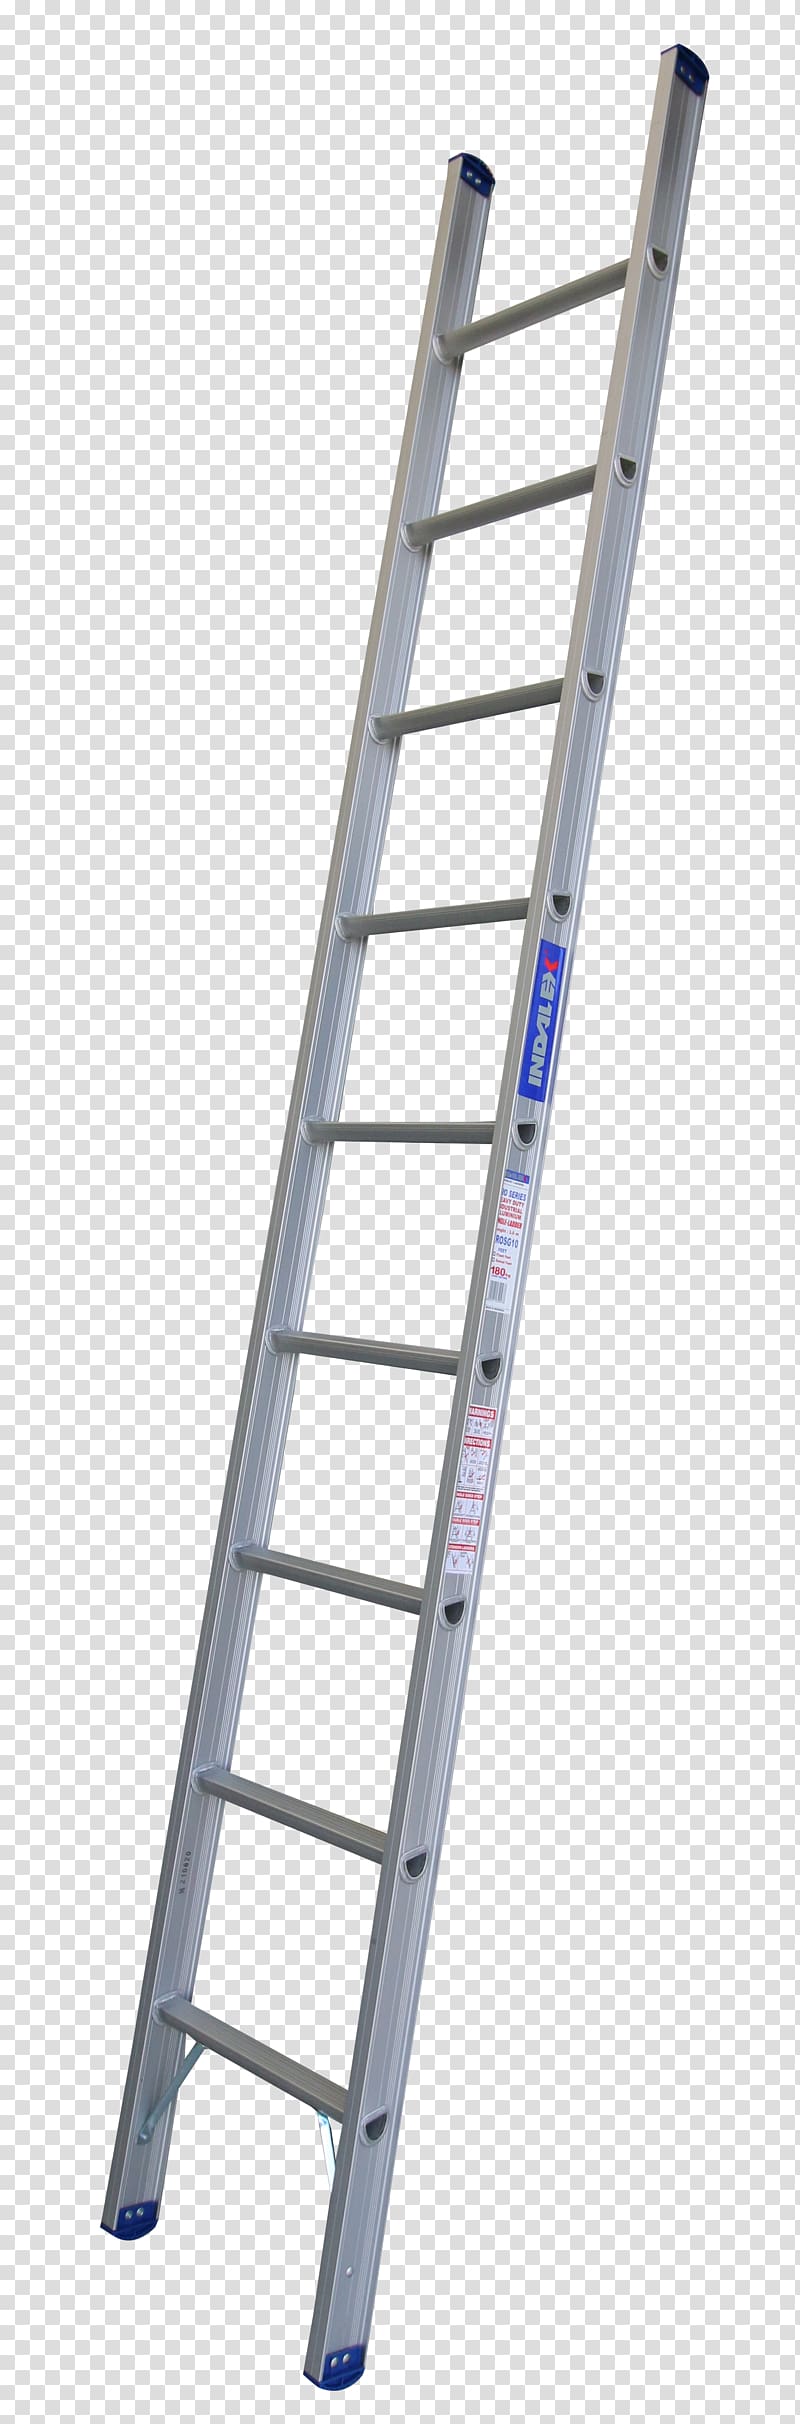 Ladder Aluminium Scaffolding Stairs Industry, ladder transparent background PNG clipart